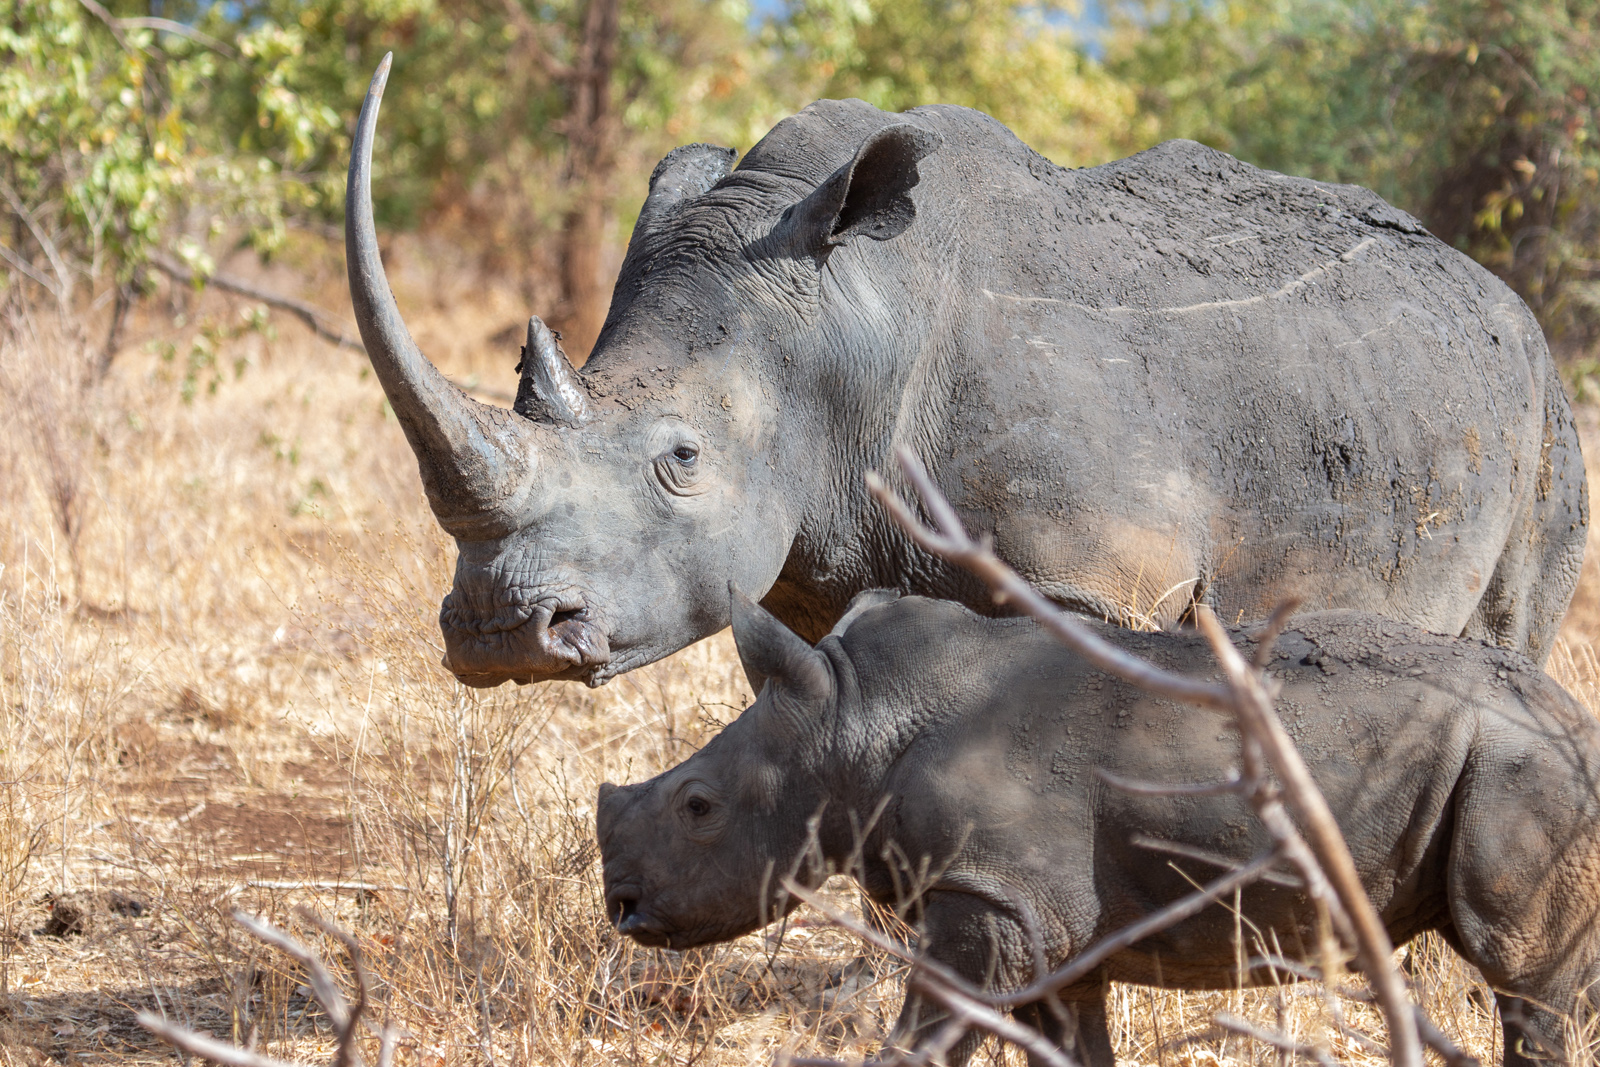 Here are our top 10 facts about rhinos